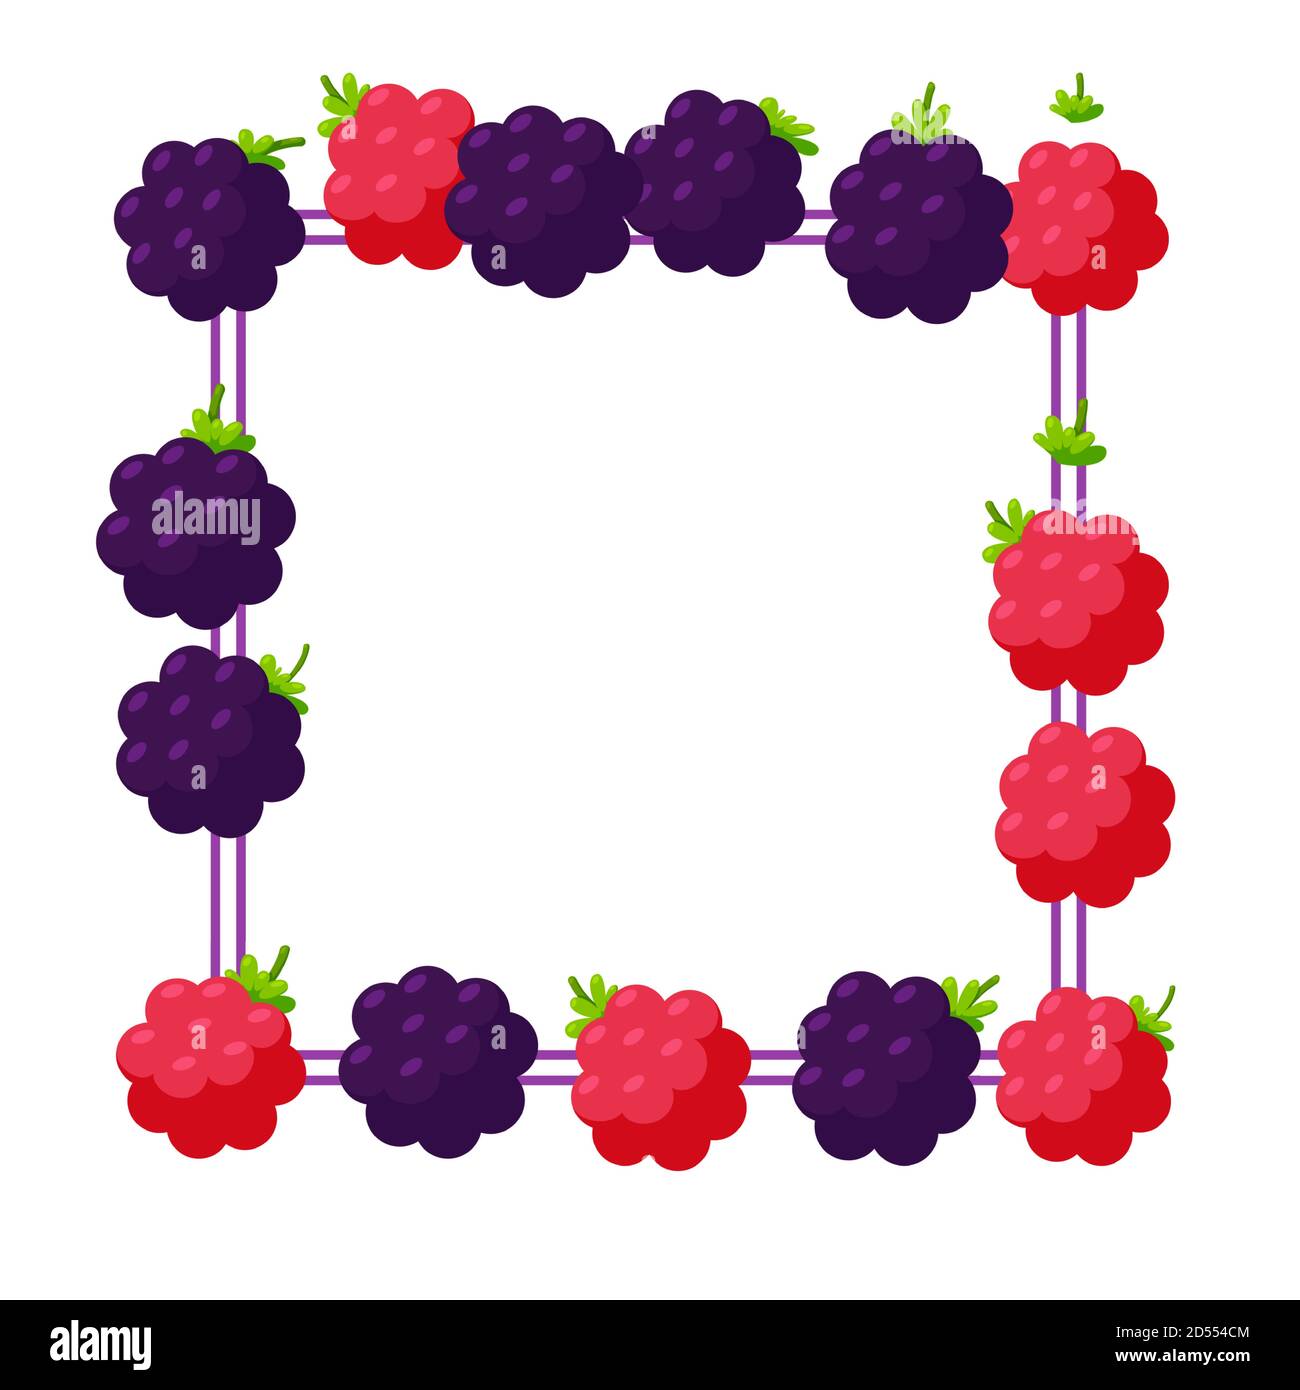 Blackberry and raspberry square frame for banners and designs. Border made of berries. Vector illustration in cute cartoon style Stock Vector